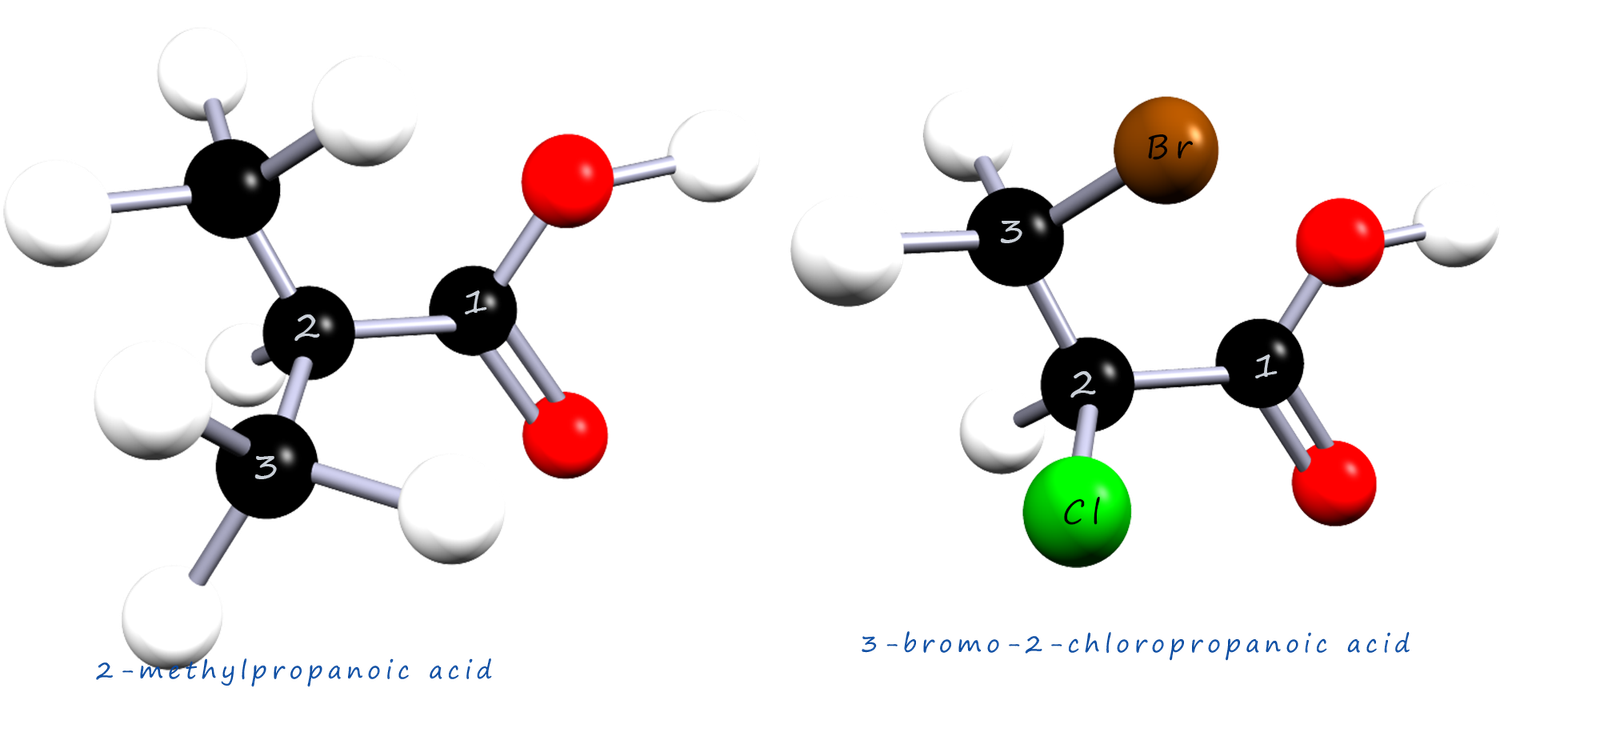 3d models of two substutiuted carboxylic acids and how to name them.